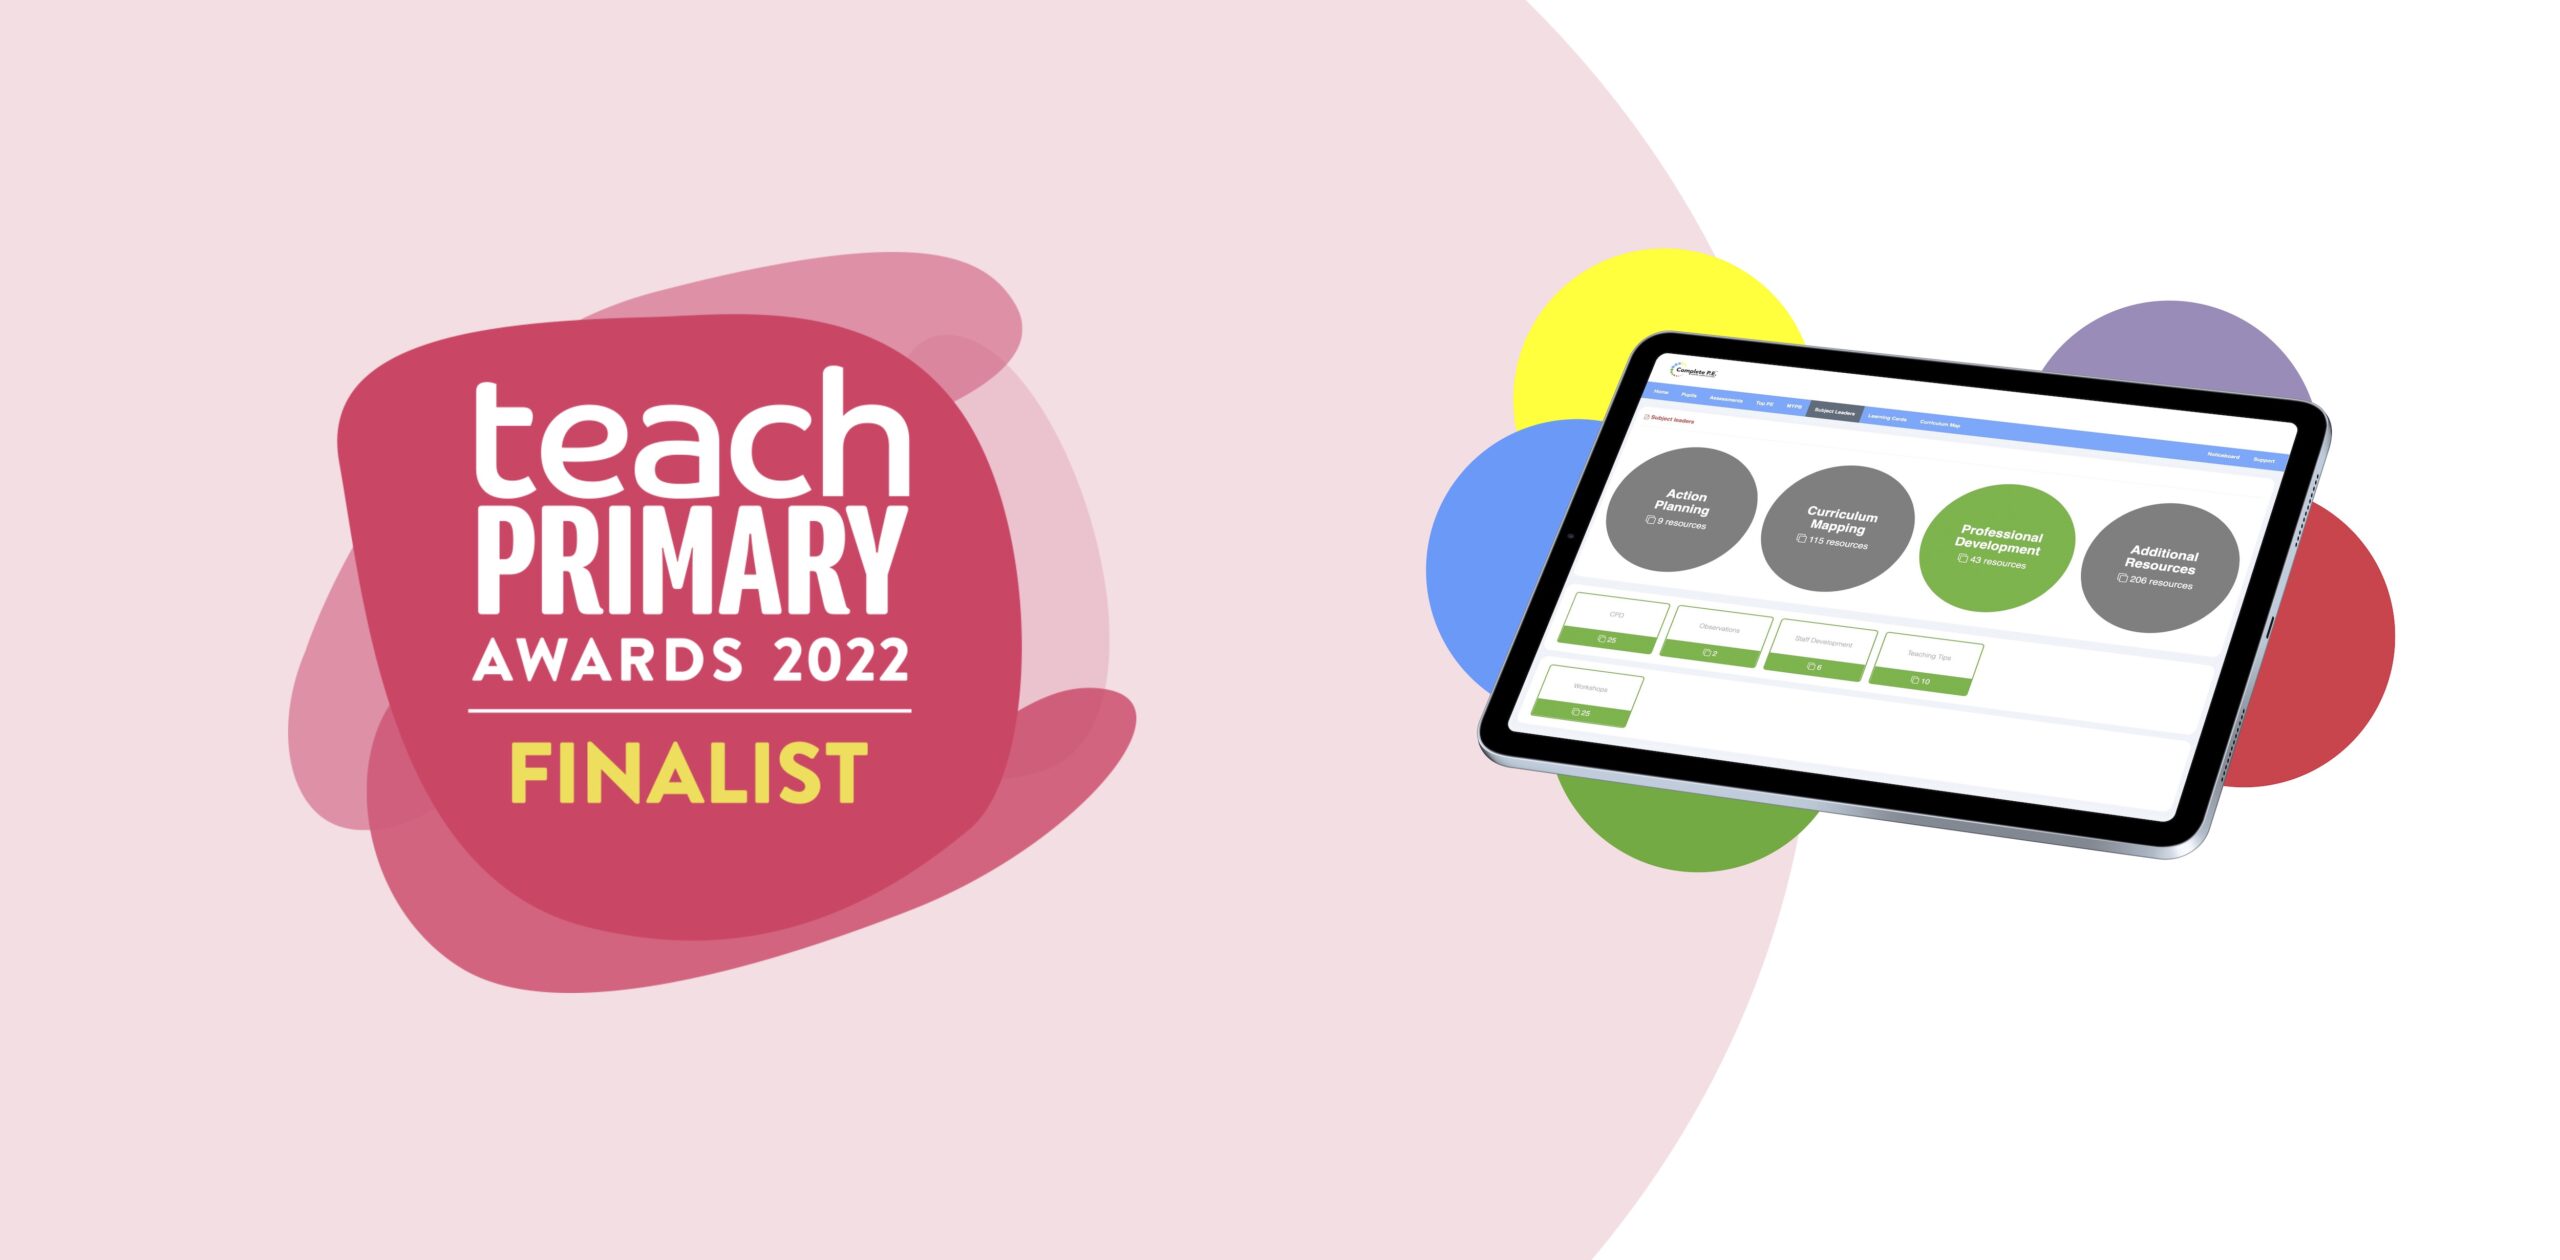 We’re finalists in the Teach Primary Awards!